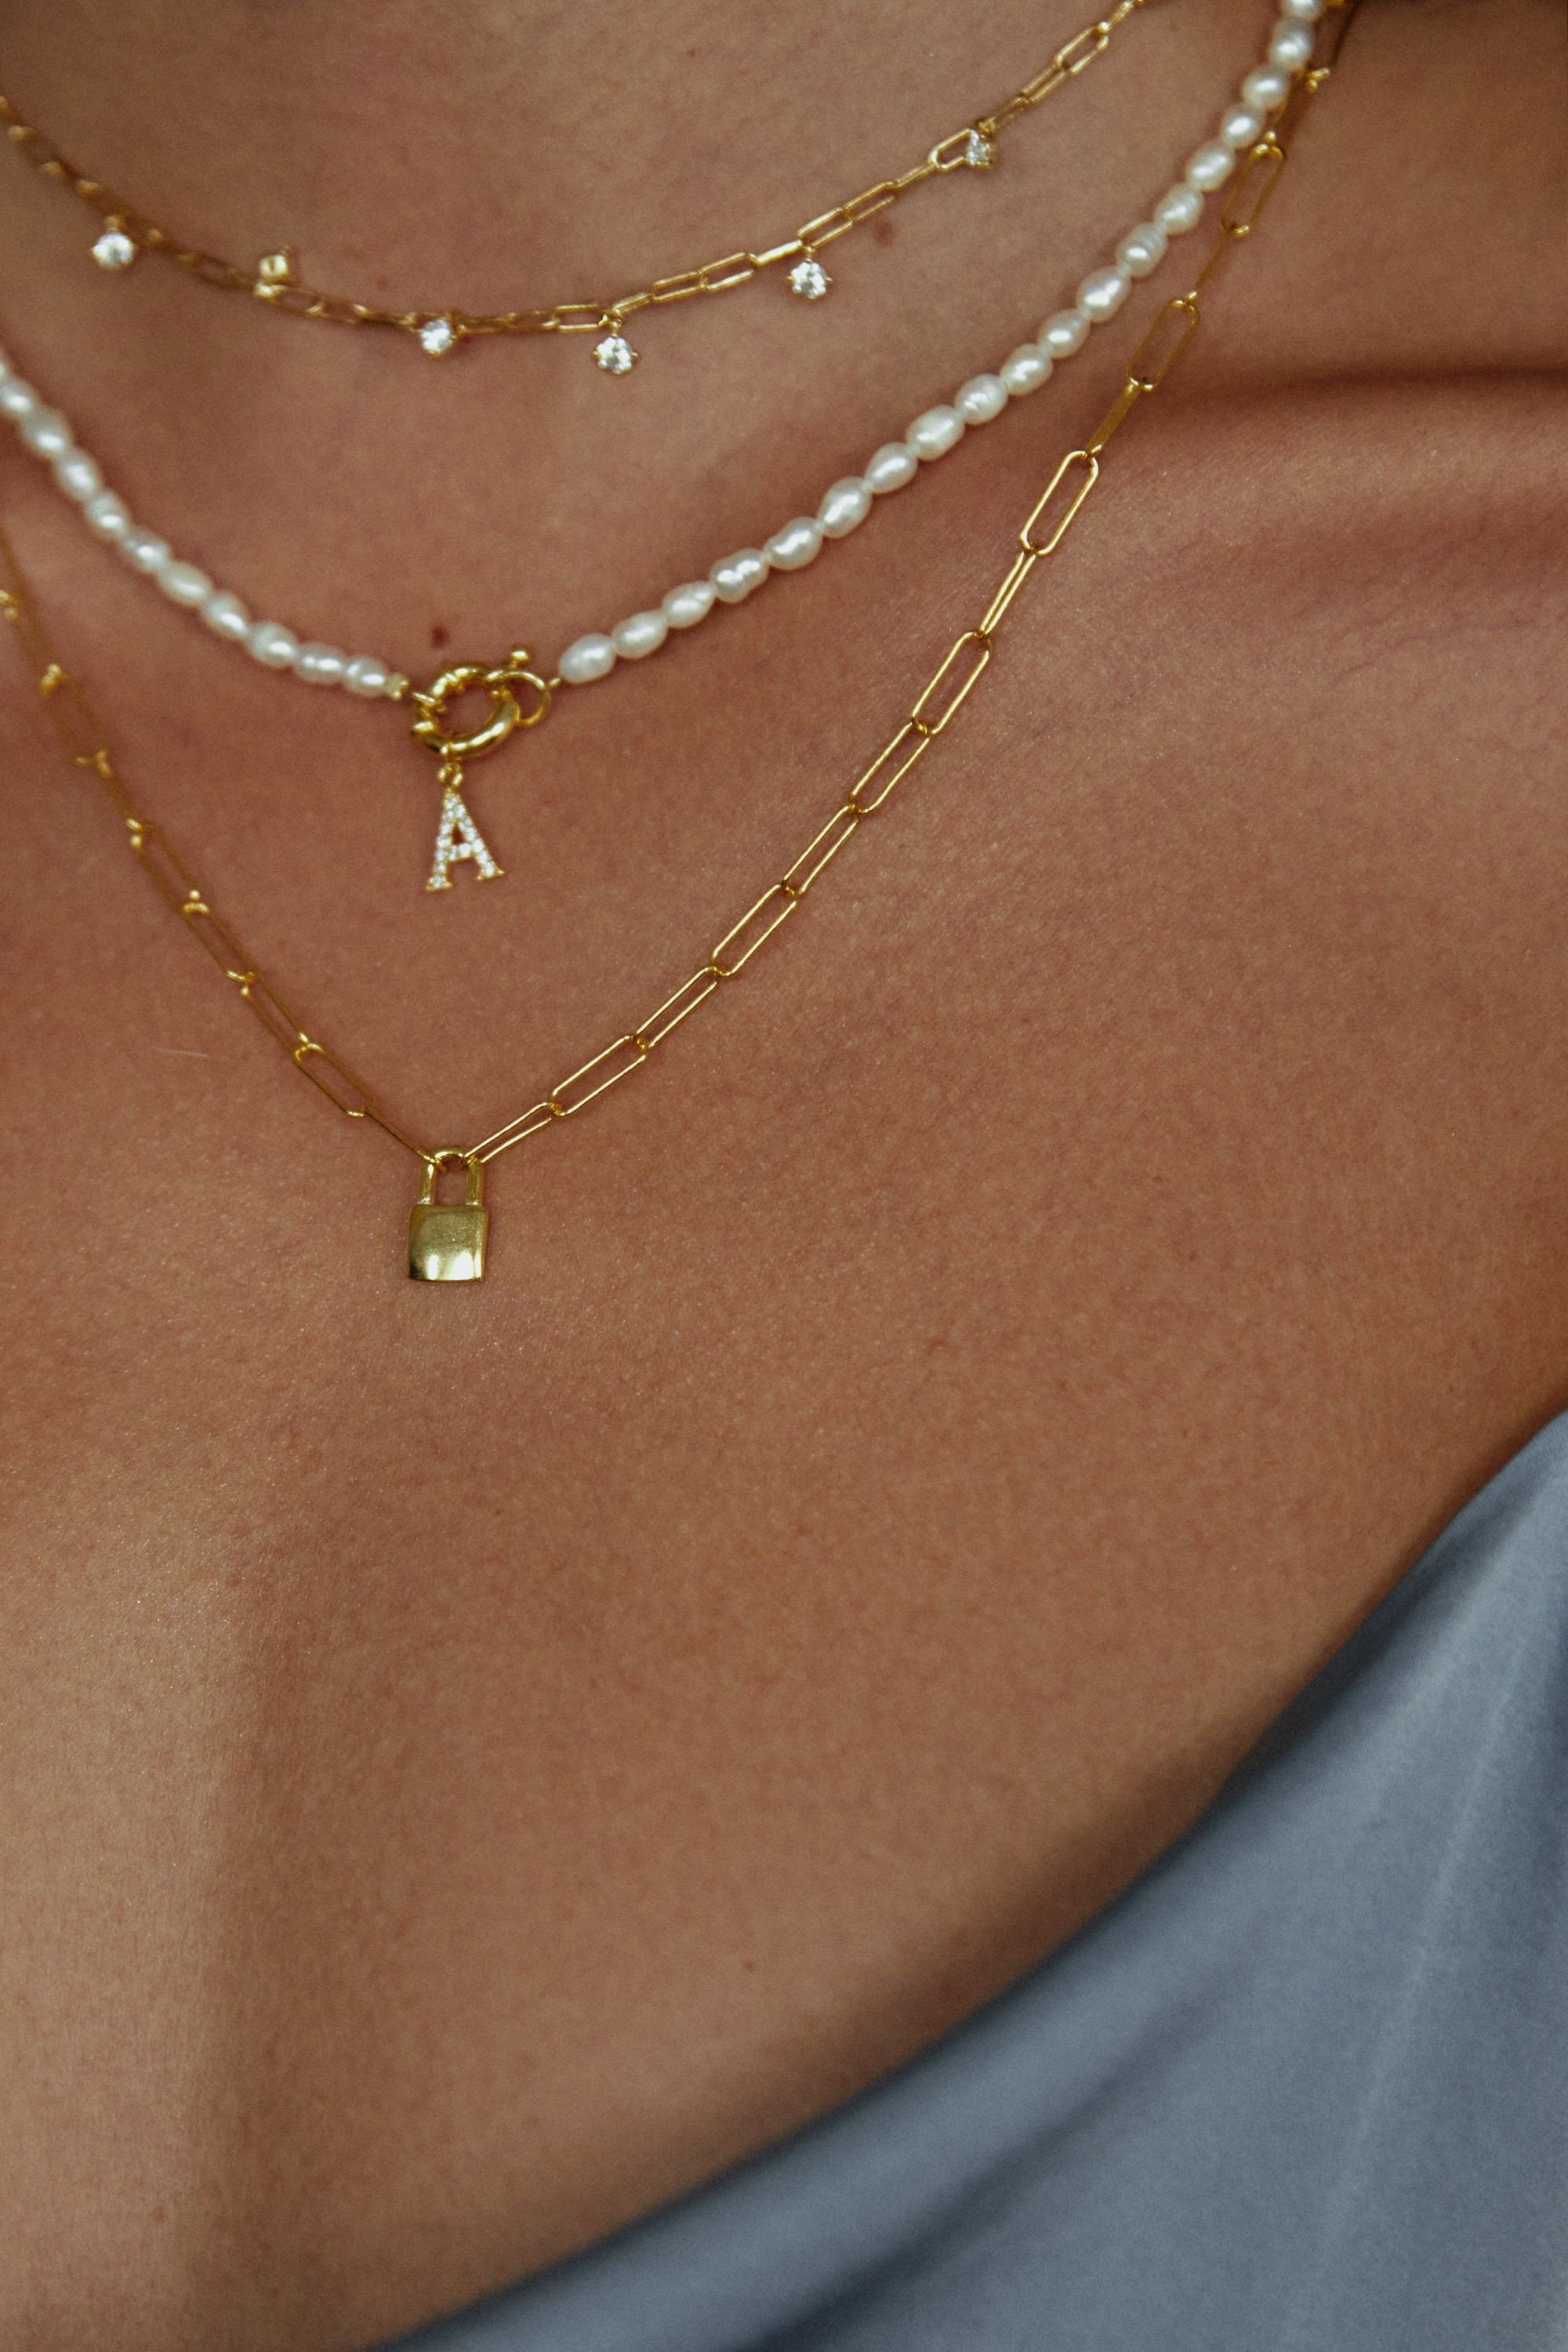 A guest wears pearls pendant necklaces from Vivienne Westwood, a